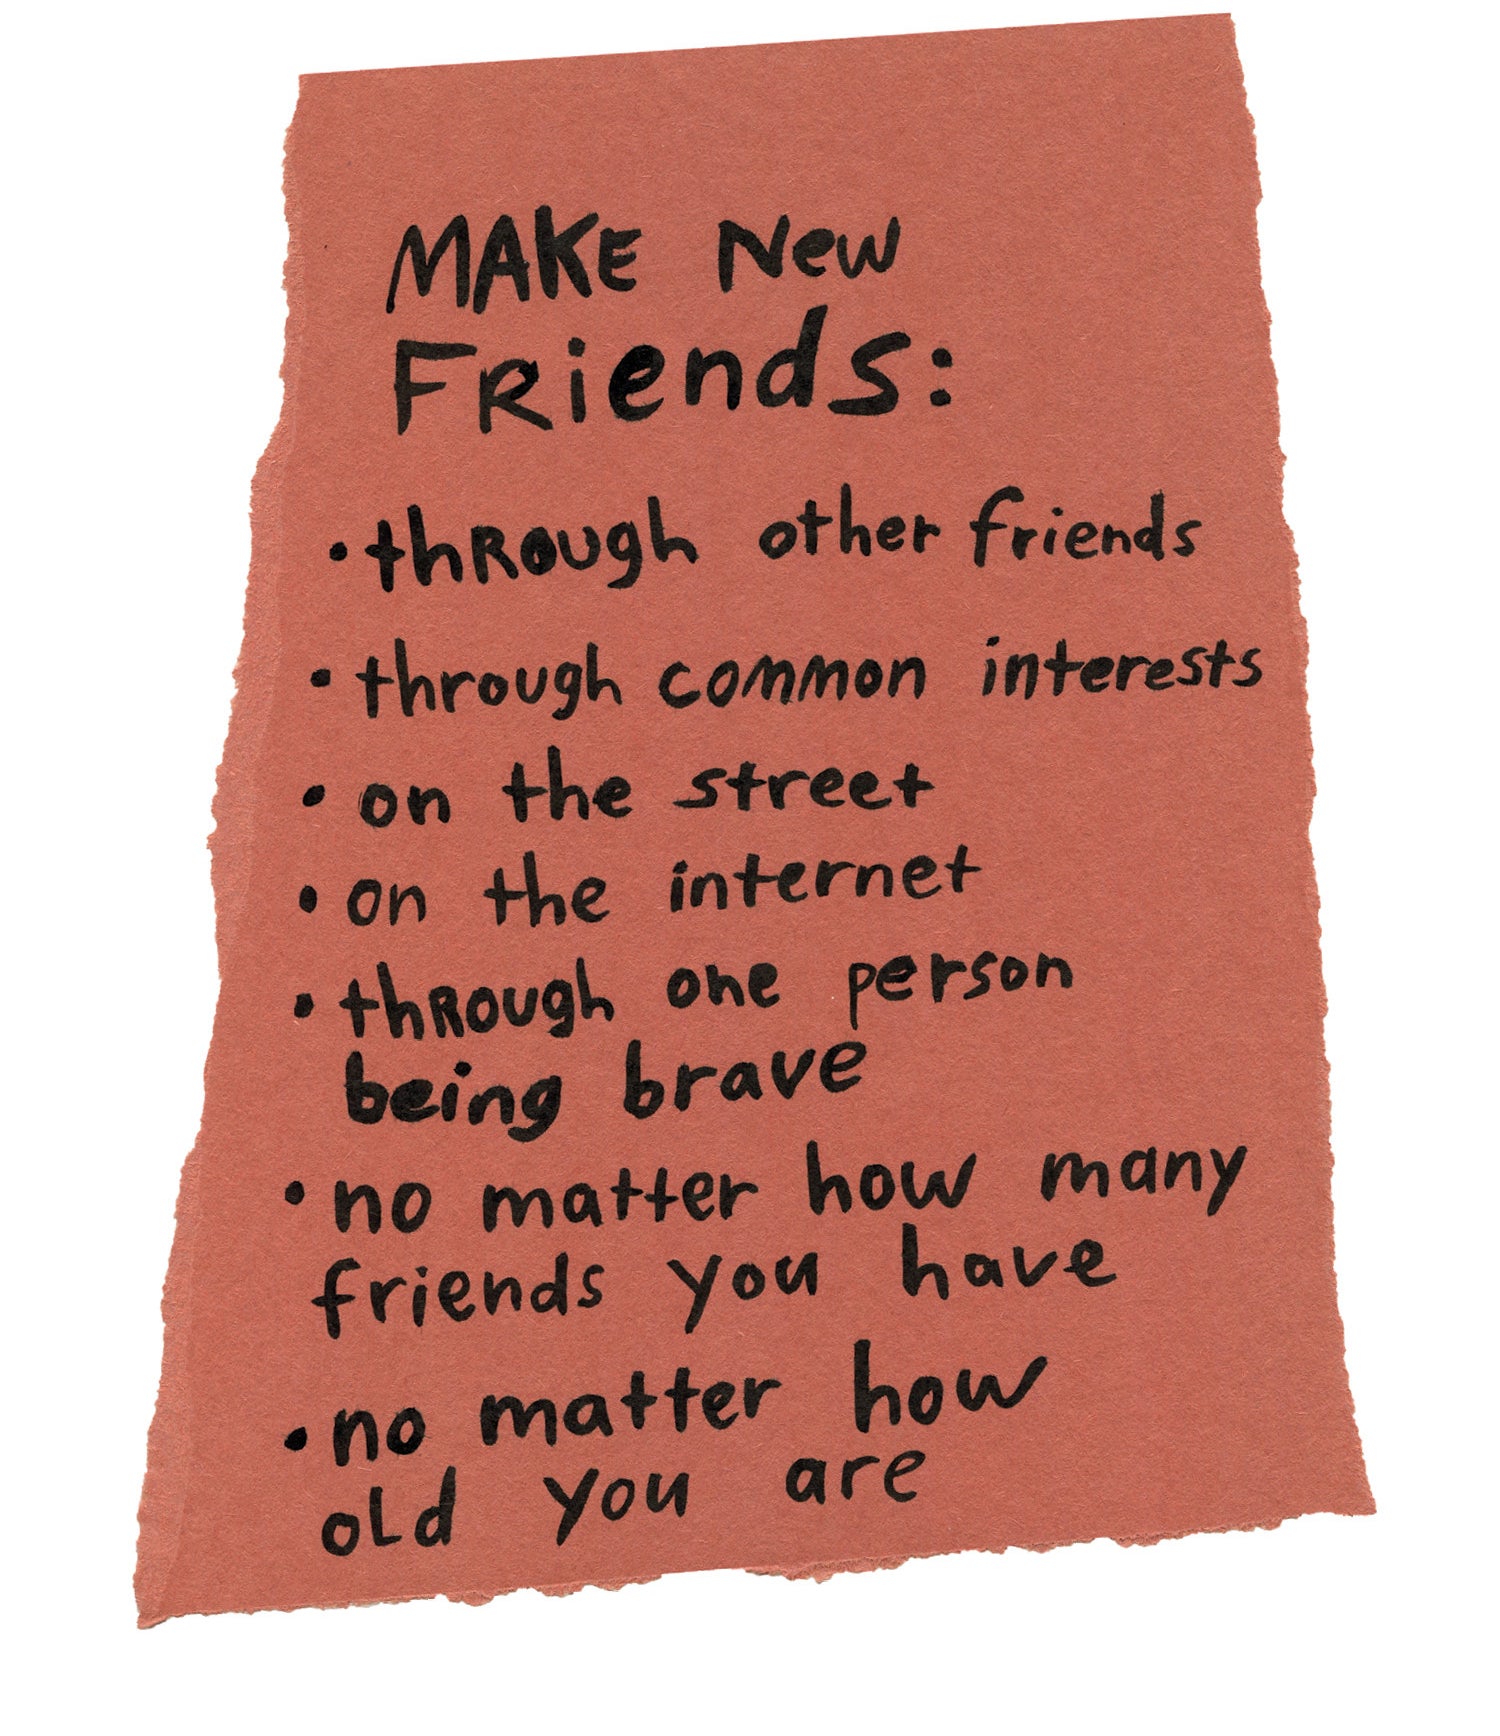 Handwritten list on torn piece of paper: &quot;Make new friends: through other friends; through common interests; on the street; on the internet; through one person being brave; no matter how many friends you have; no matter how old you are.&quot;